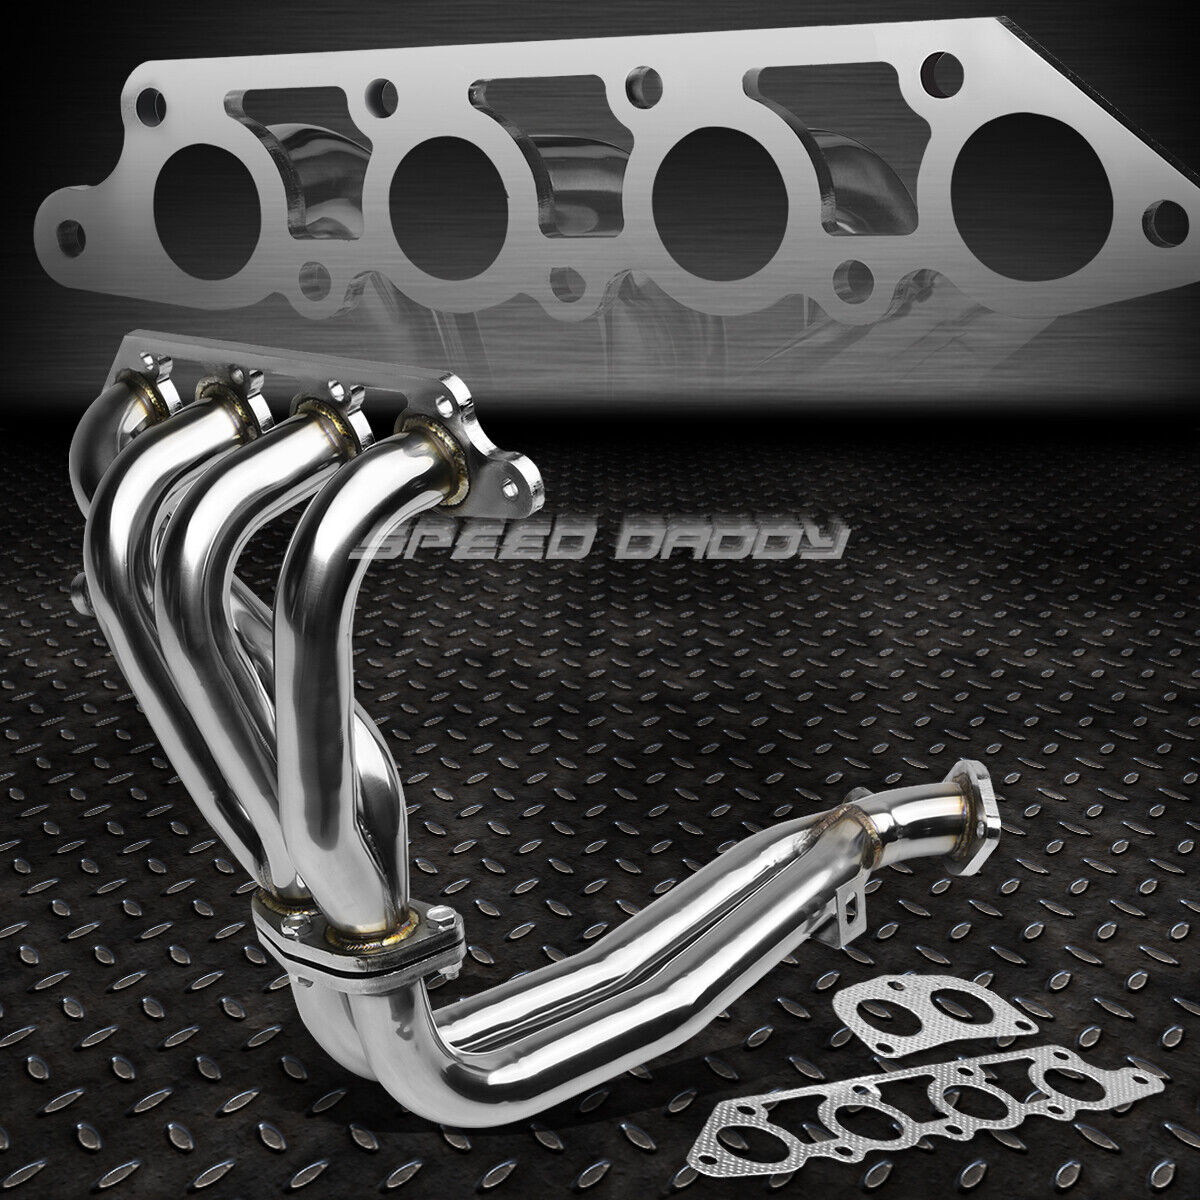 FOR 98-02 FORD ESCORT ZX2 S/R 2.0 STAINLESS STEEL RACING HEADER/EXHAUST MANIFOLD